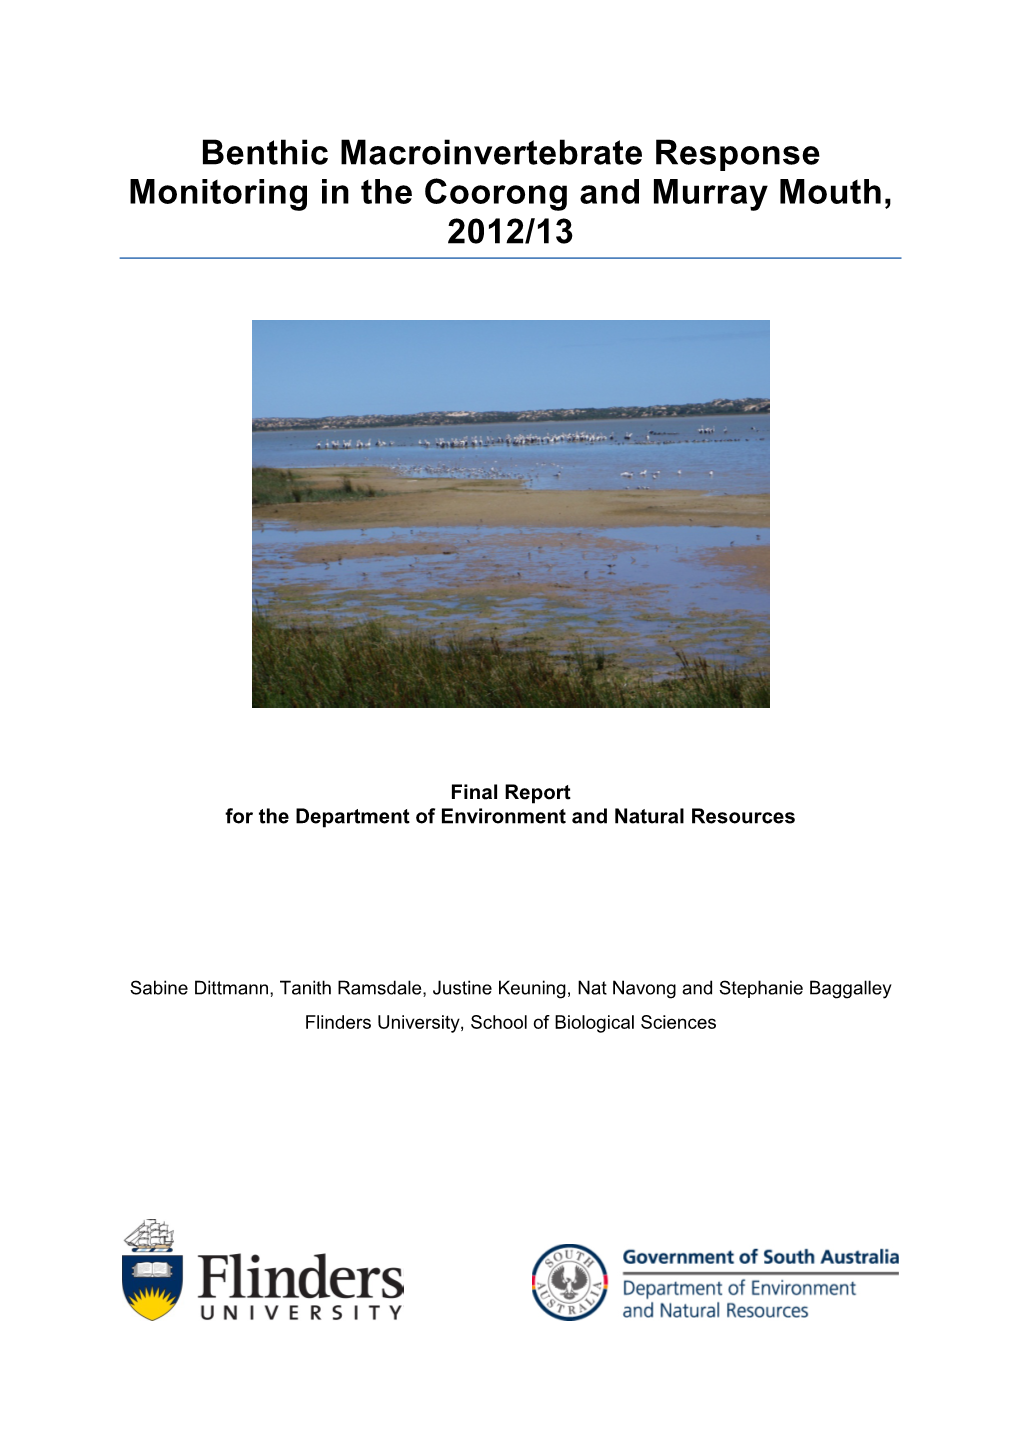 Benthic Macroinvertebrate Response Monitoring in the Coorong and Murray Mouth, 2012/13